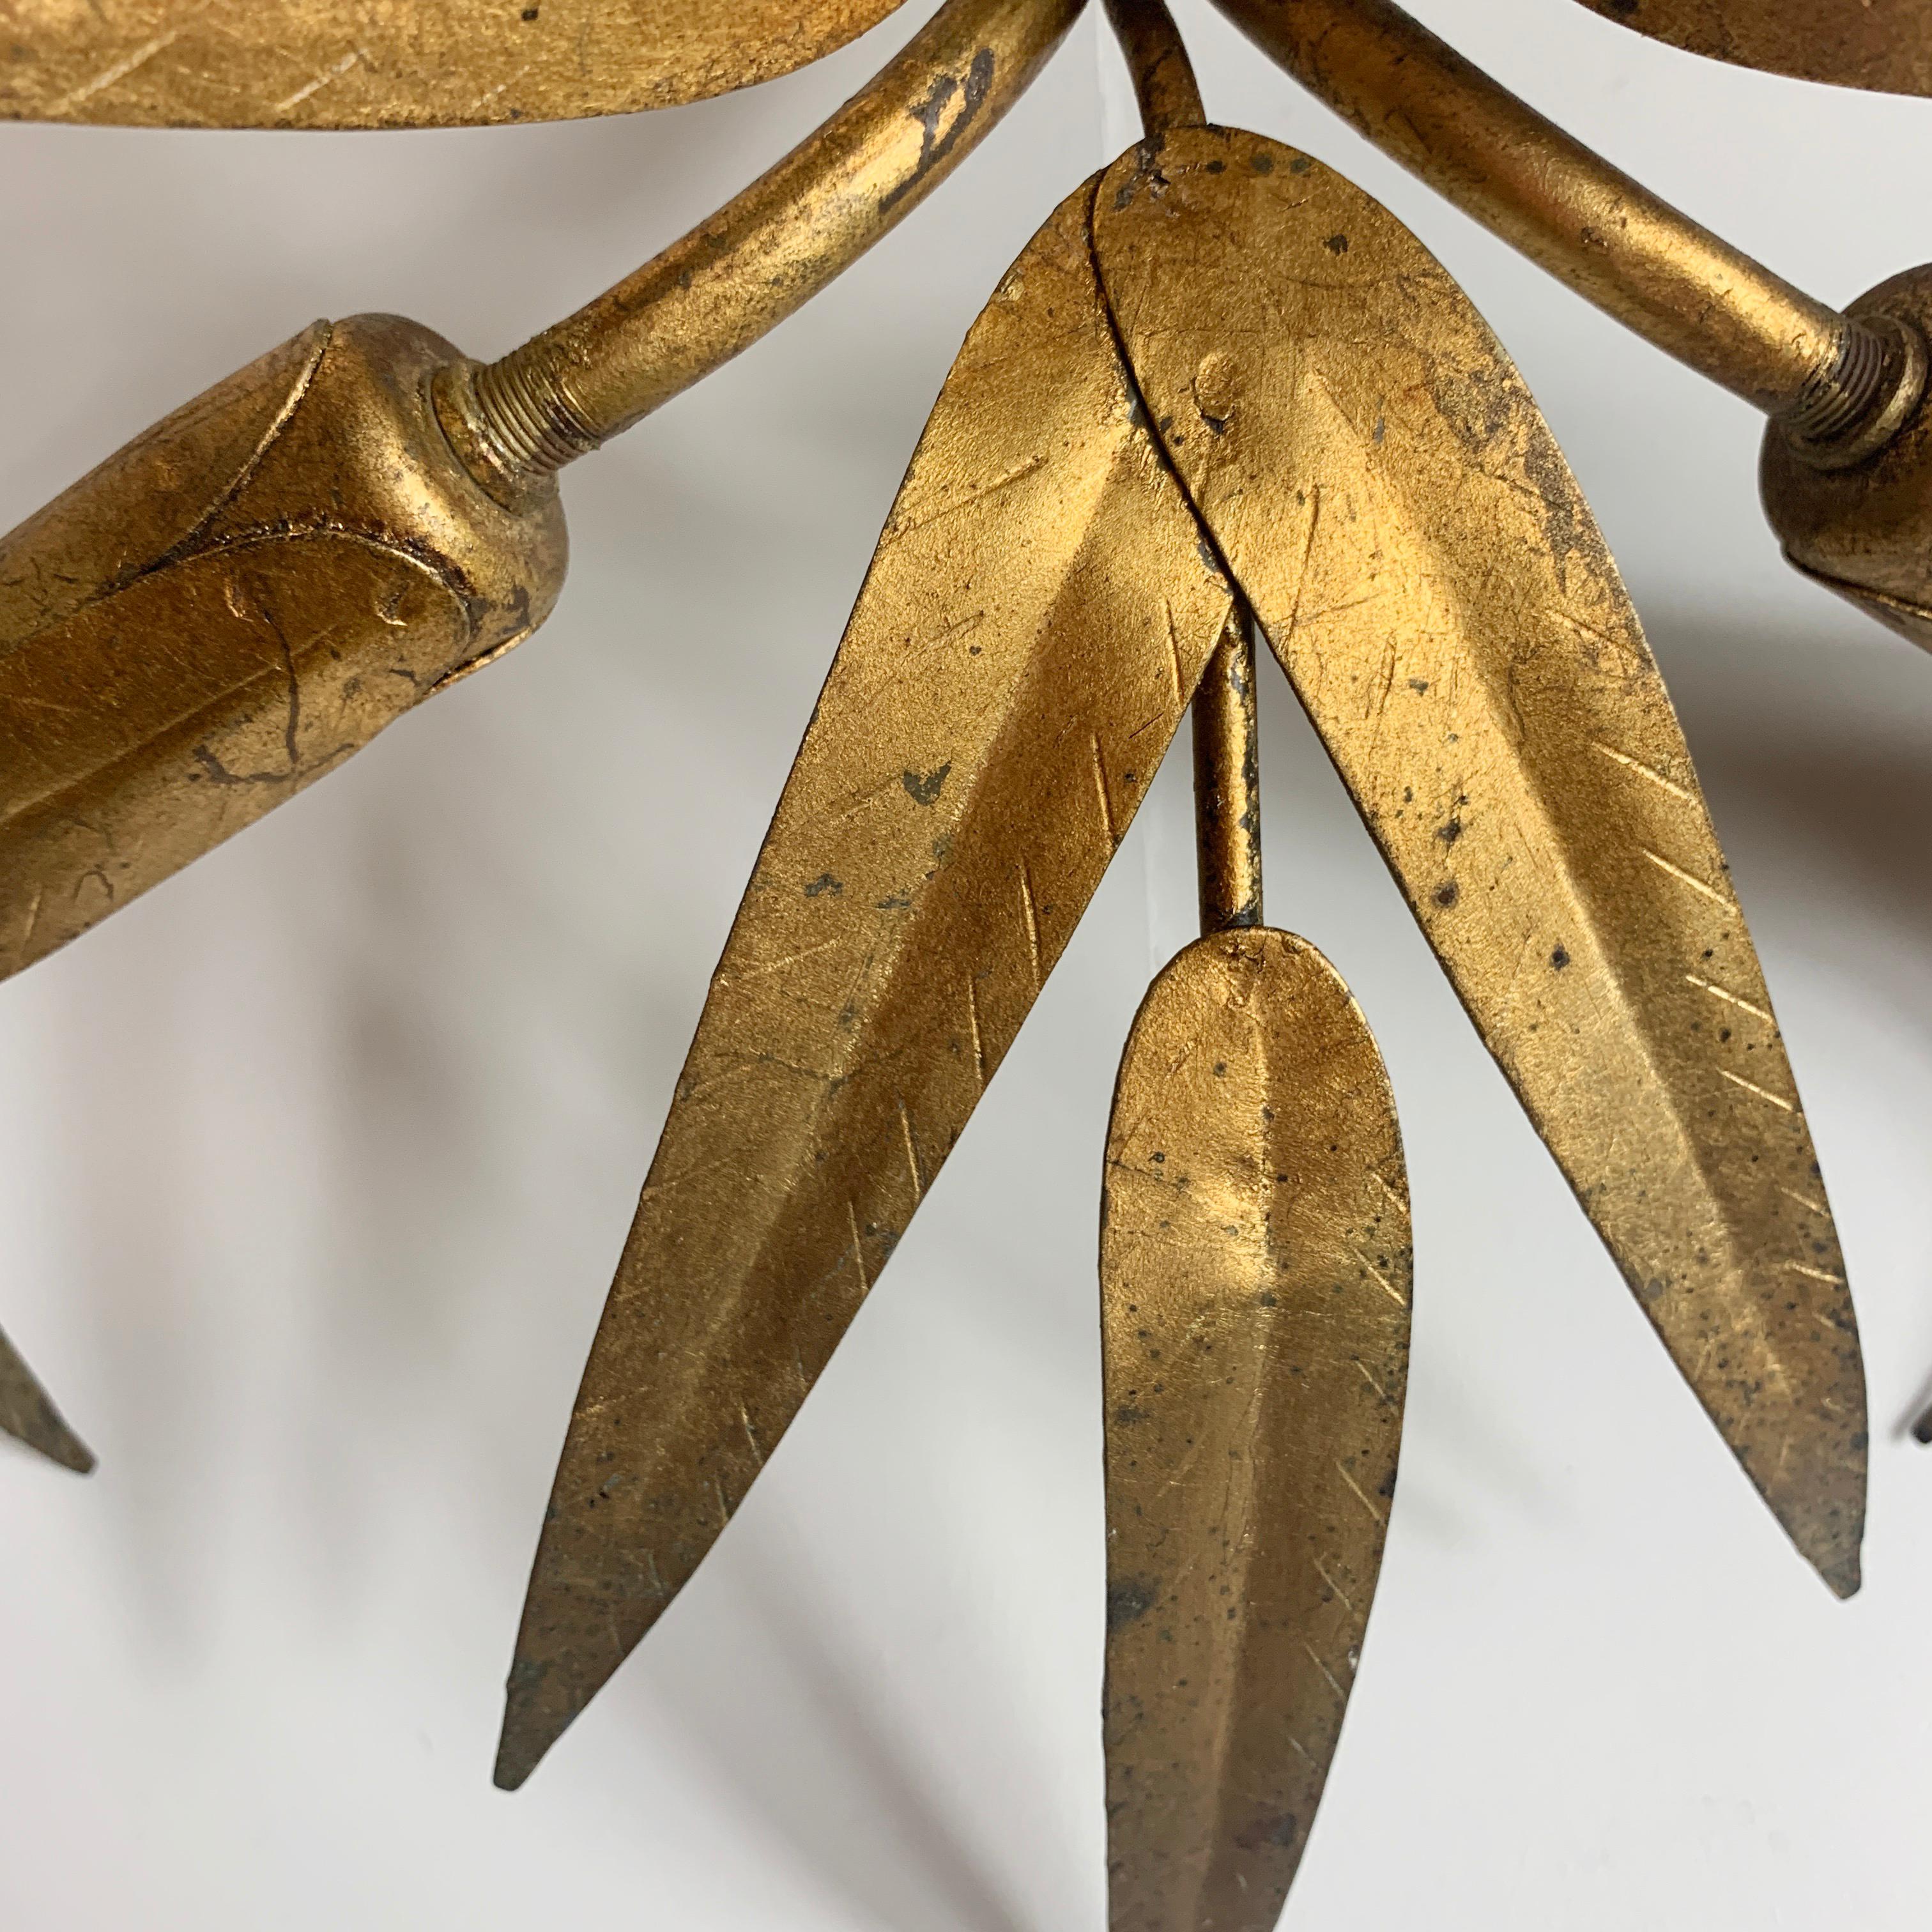 Midcentury Gilt Spanish ceiling light
Attributed to Ferro Art, Spain
Beautiful gilt leaves surrounding spikey gilt buds
There are 3 bulb holders one in each bud
A small ceiling rose has a hook on the back to attach
Measures: 43 cm width, 24 cm